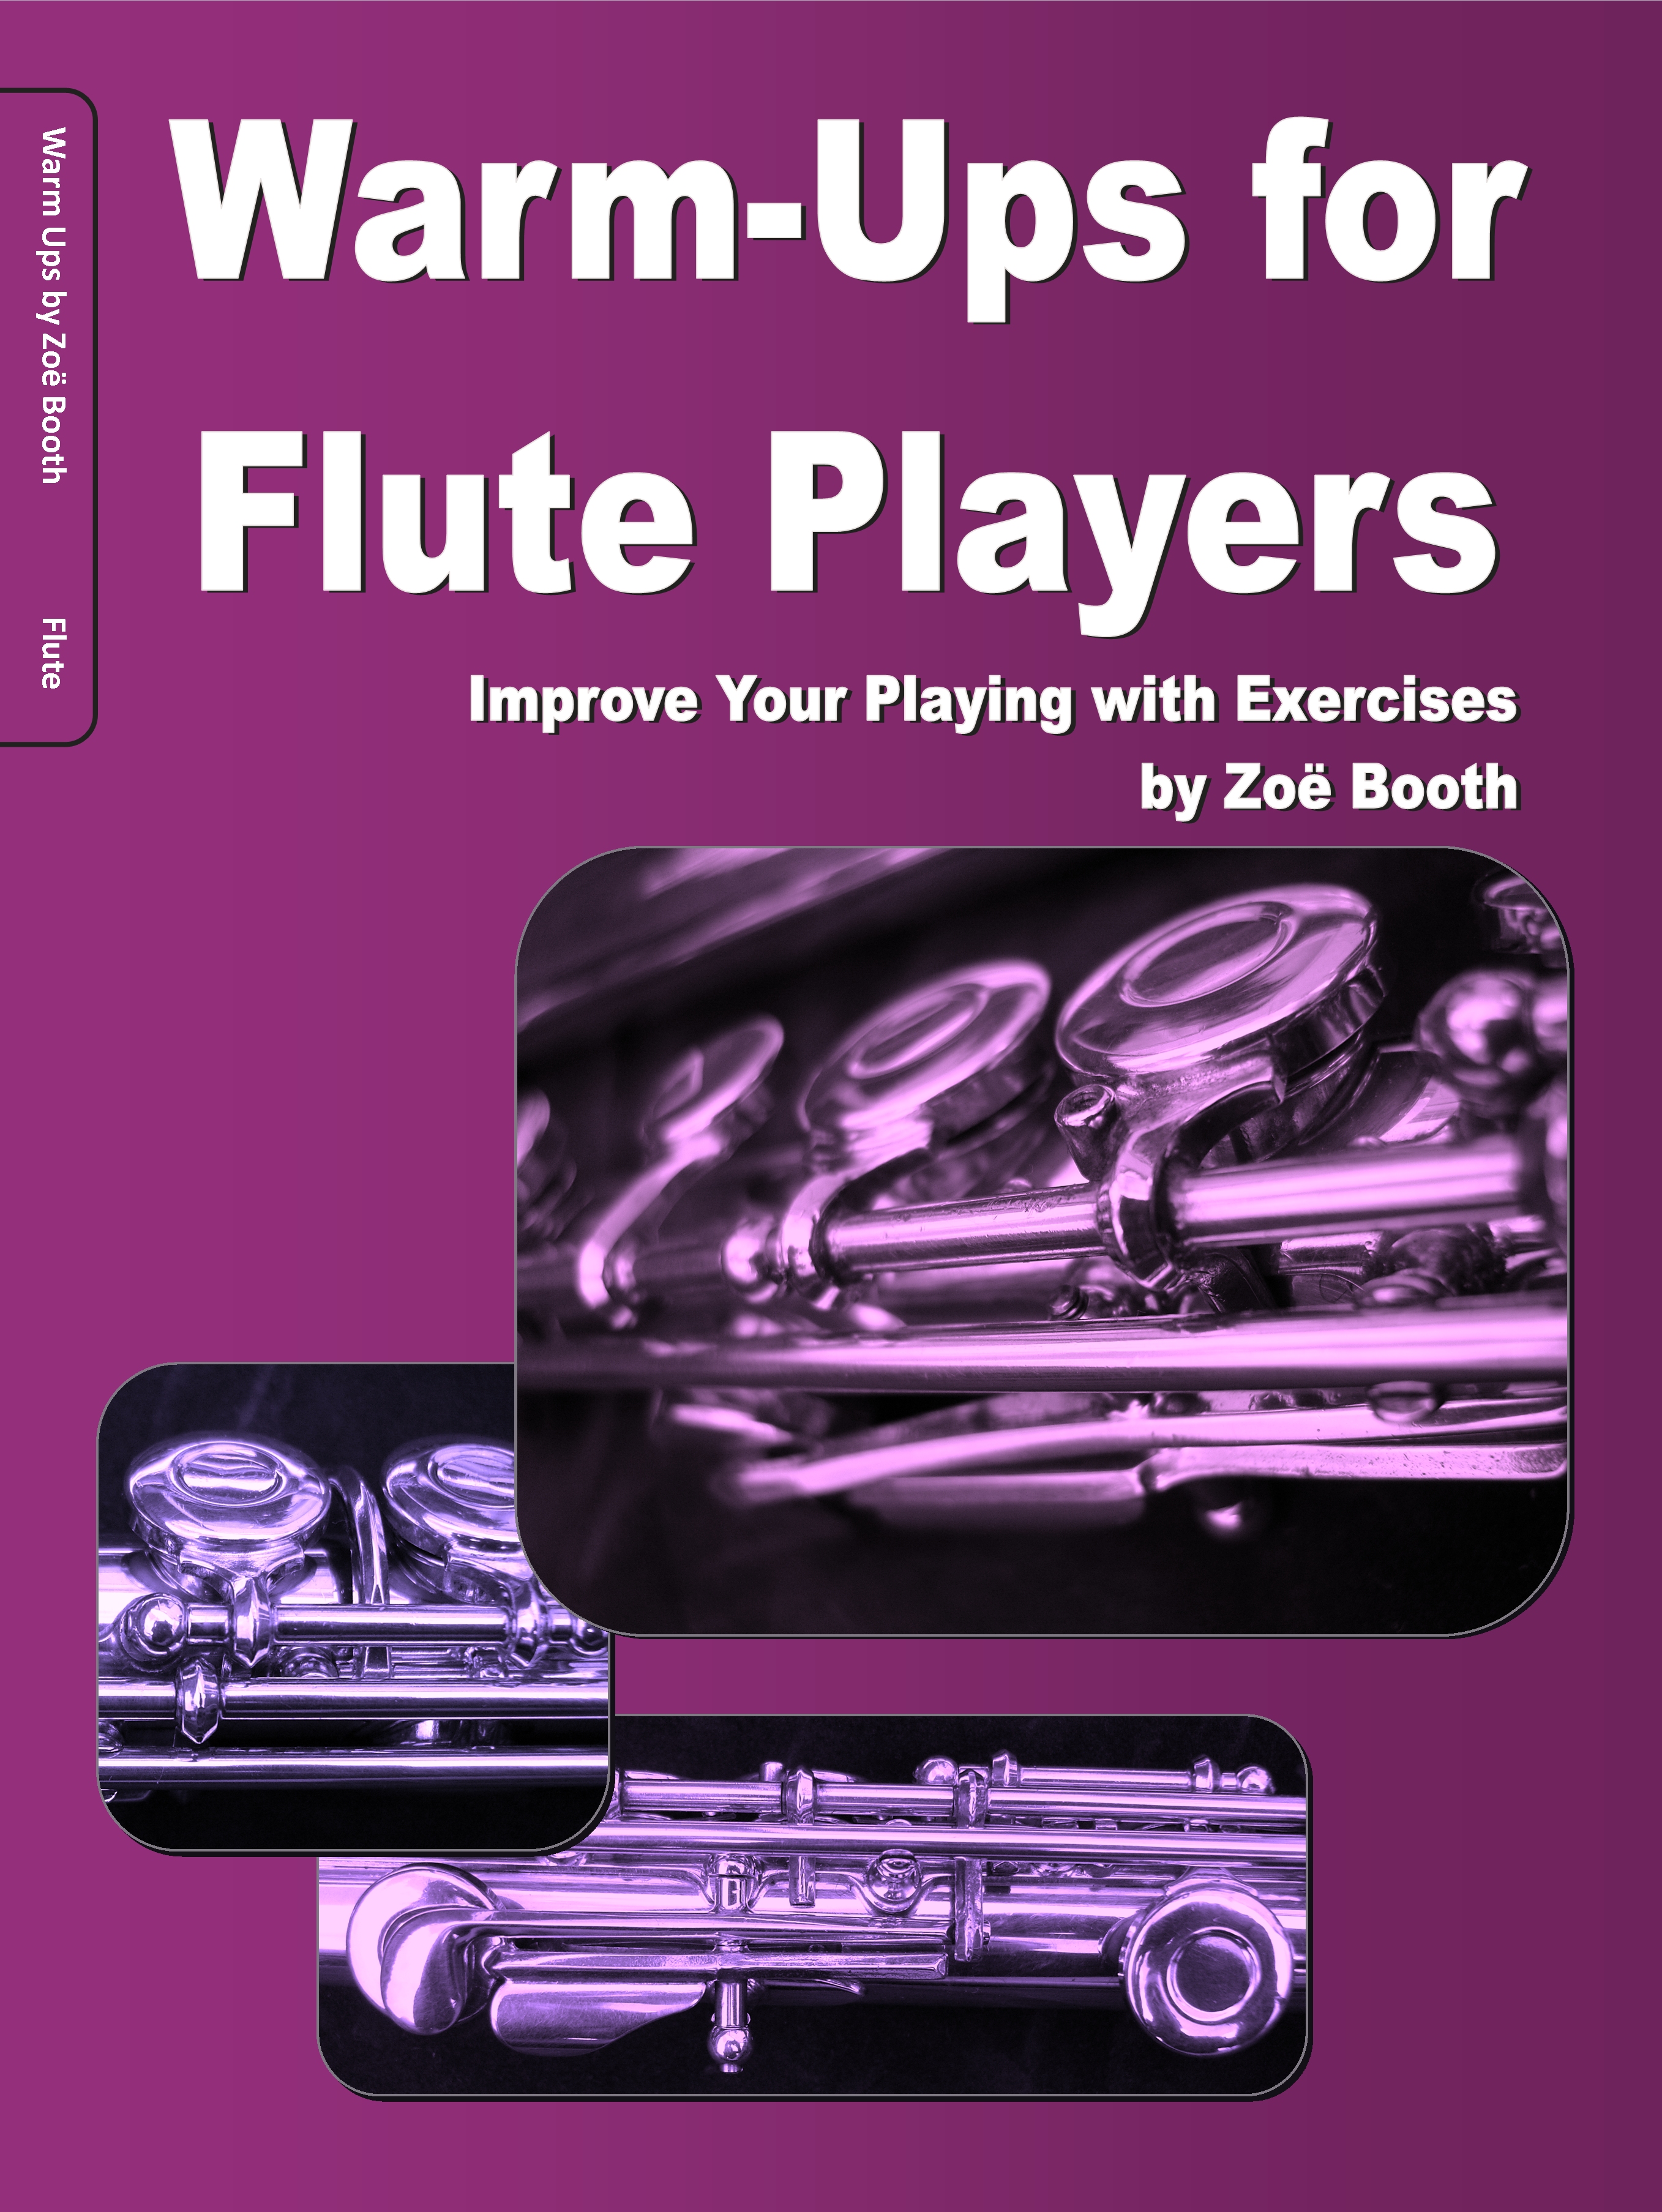 Warm-Ups for Flute Players -  Improve Your Playing with Exercises by Zoë Booth